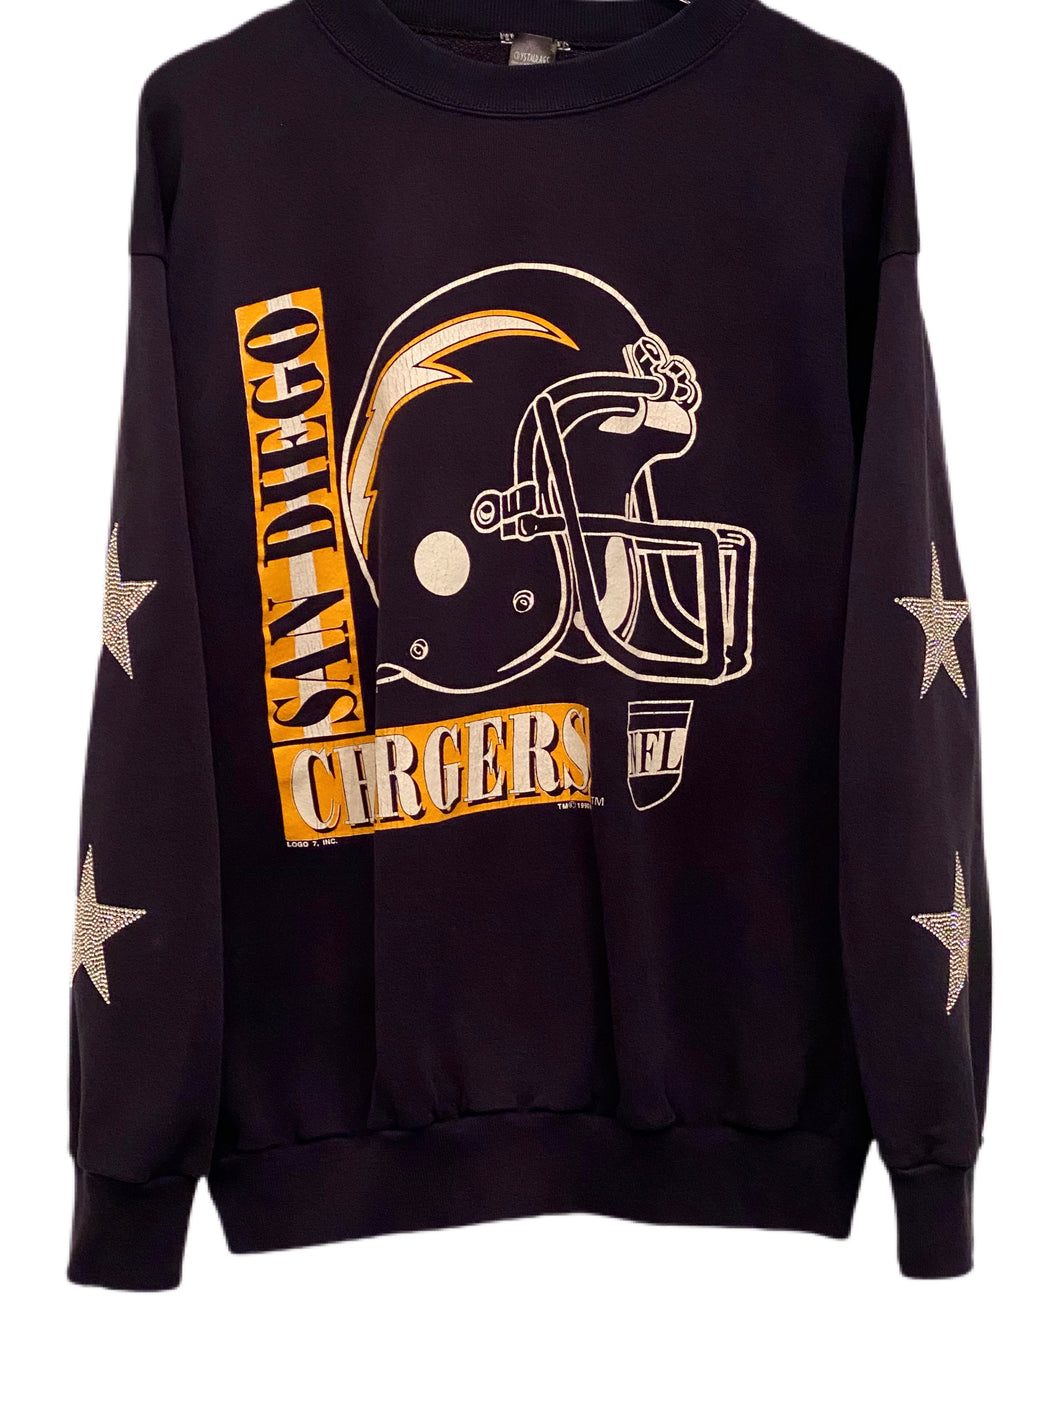 San Diego Chargers, NFL One of a KIND Vintage Sweatshirt with Crystal Star Design